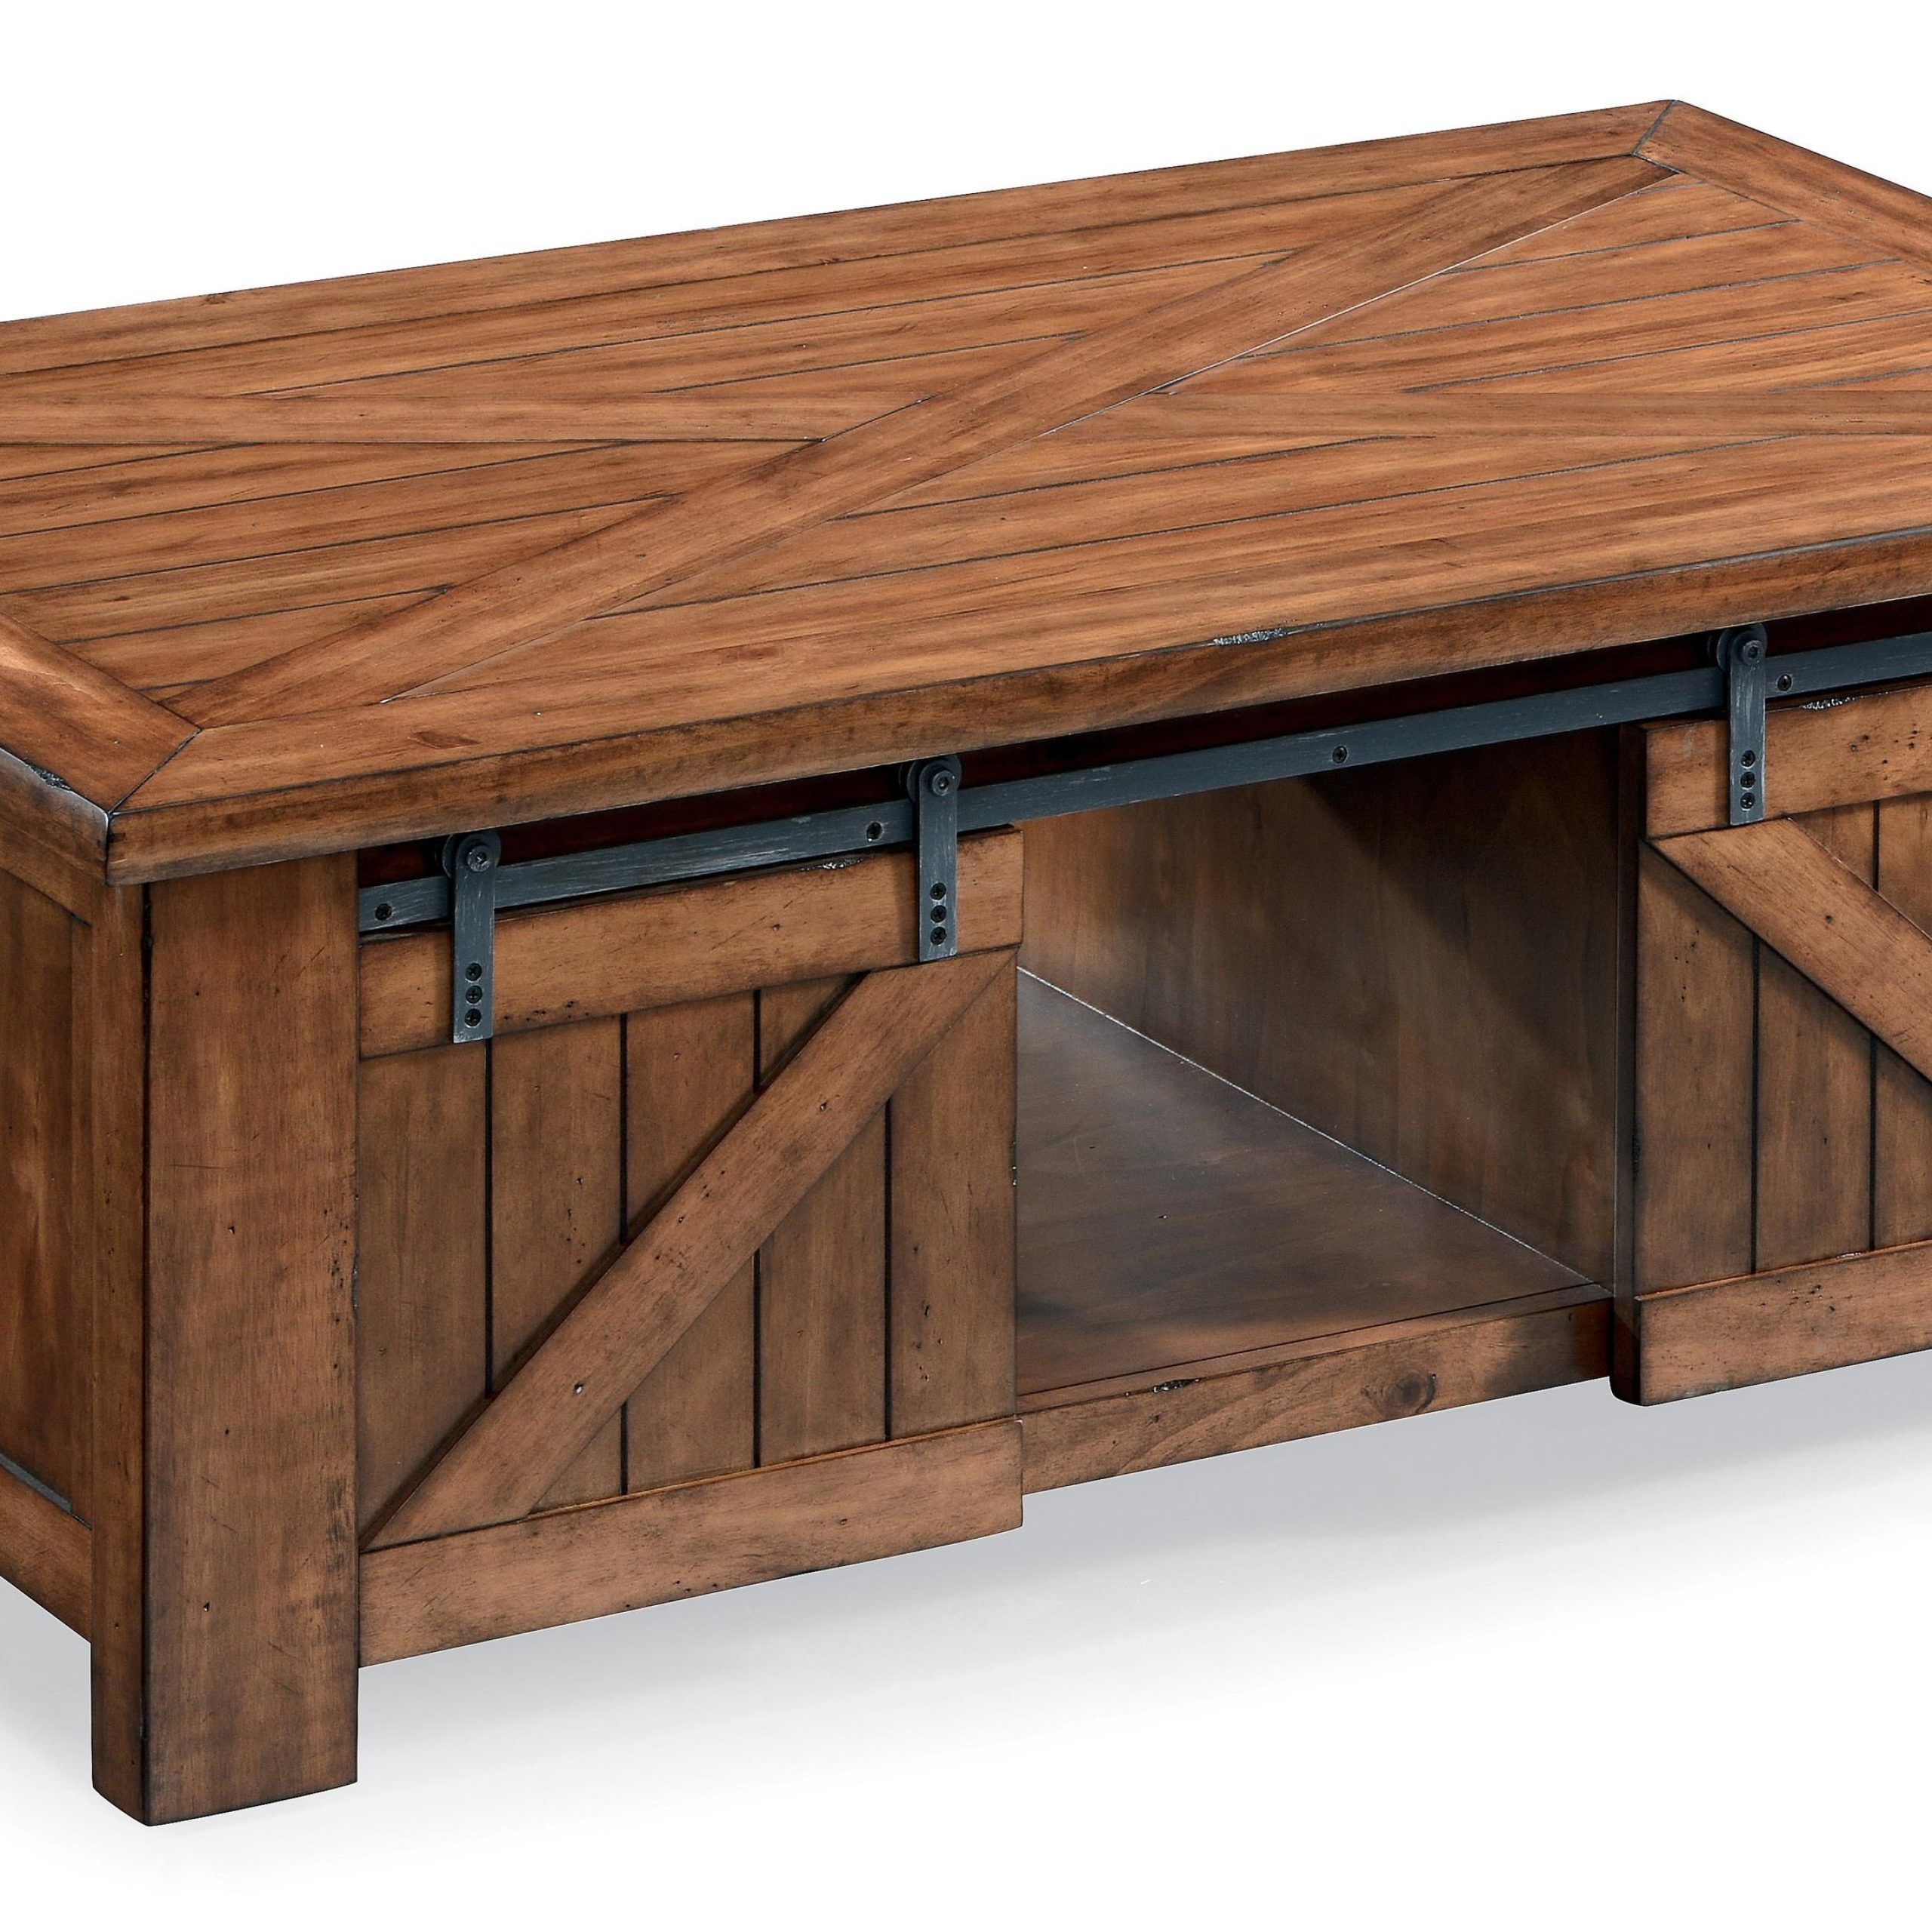 Harper Farm Country Industrial Rectangular Lift Top Cocktail Table With Inside Coffee Tables With Storage And Barn Doors (View 4 of 20)